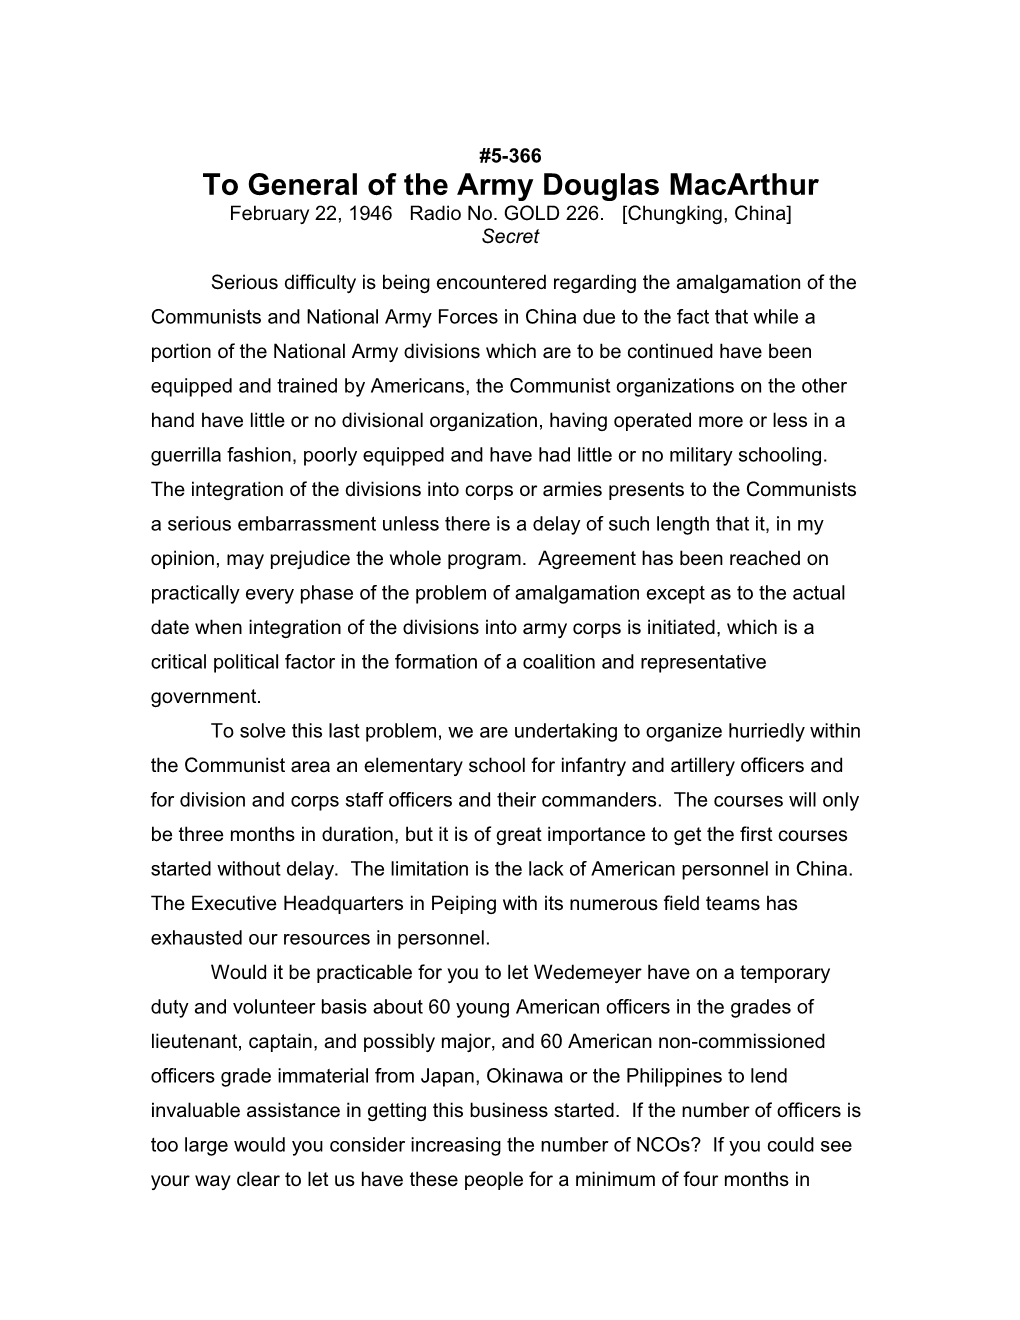 To General of the Army Douglas Macarthur